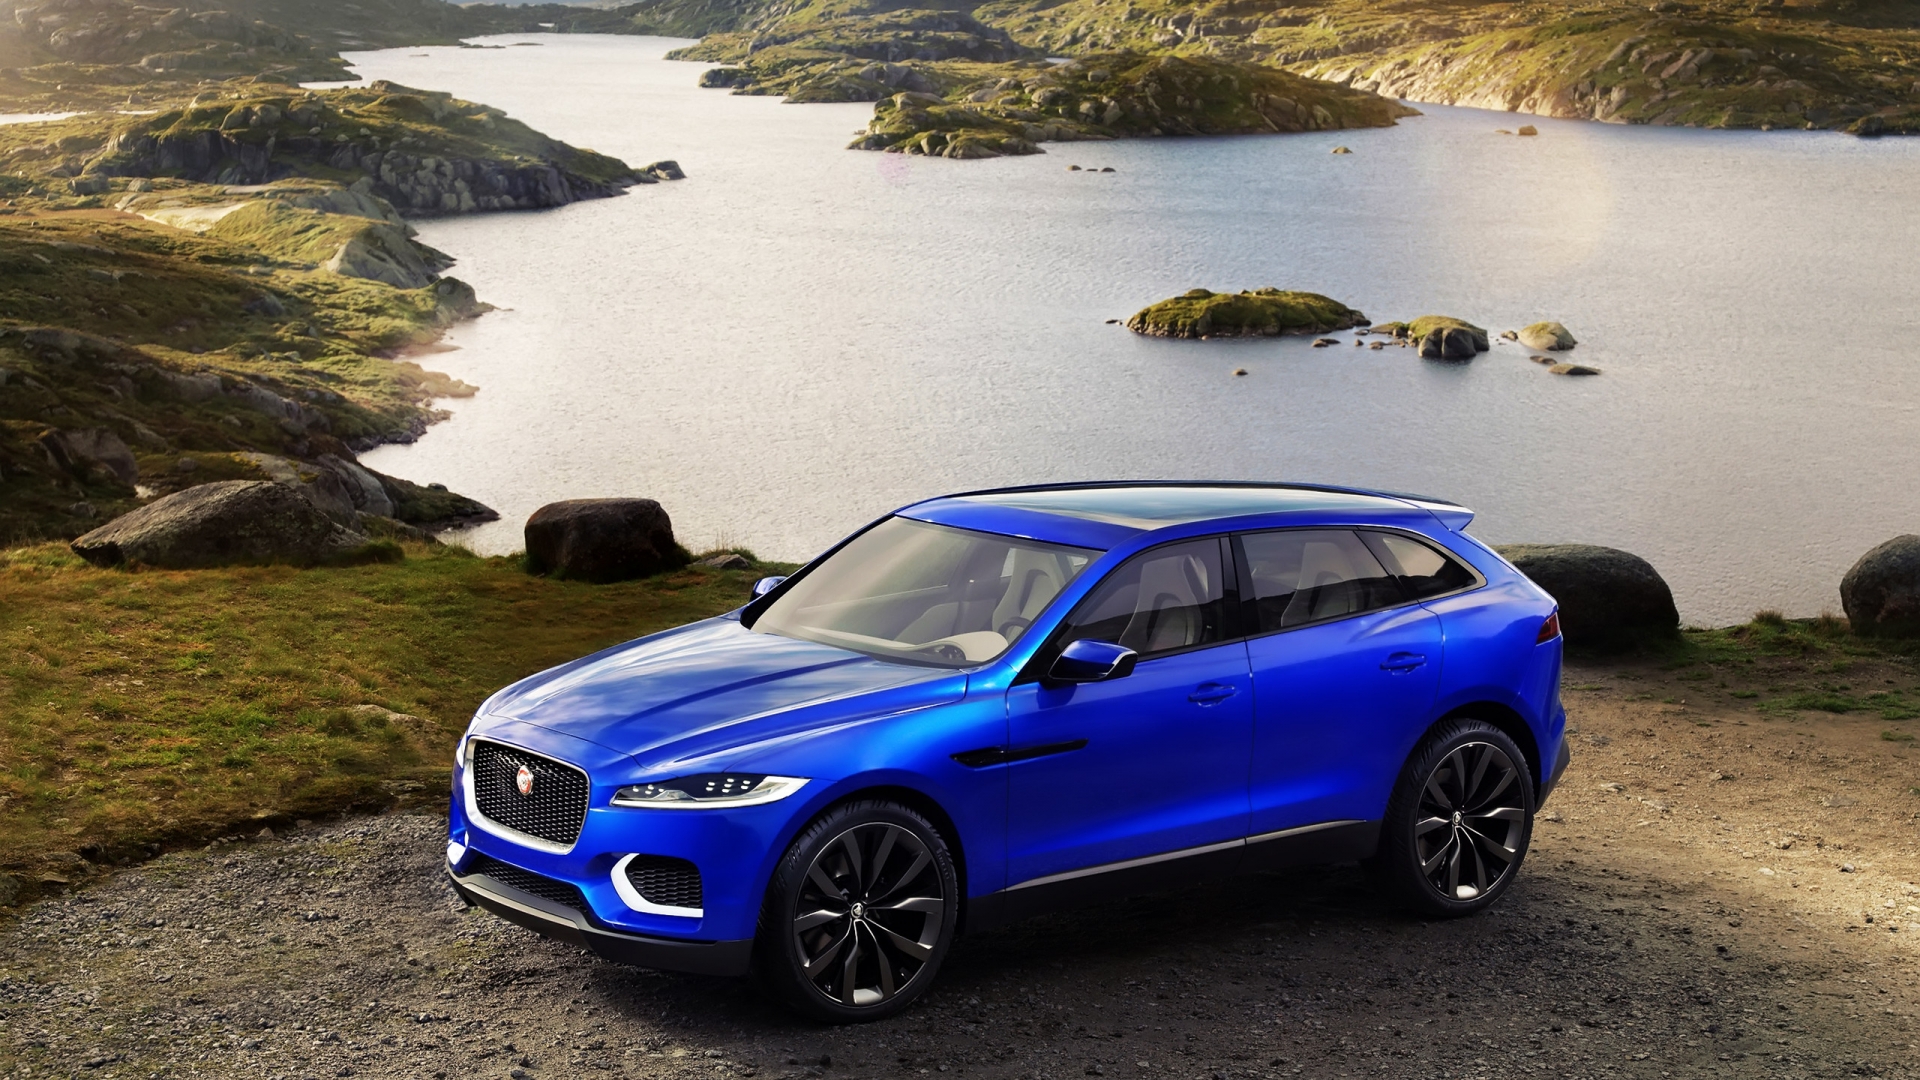 Beautiful Jaguar Crossover Concept for 1920 x 1080 HDTV 1080p resolution